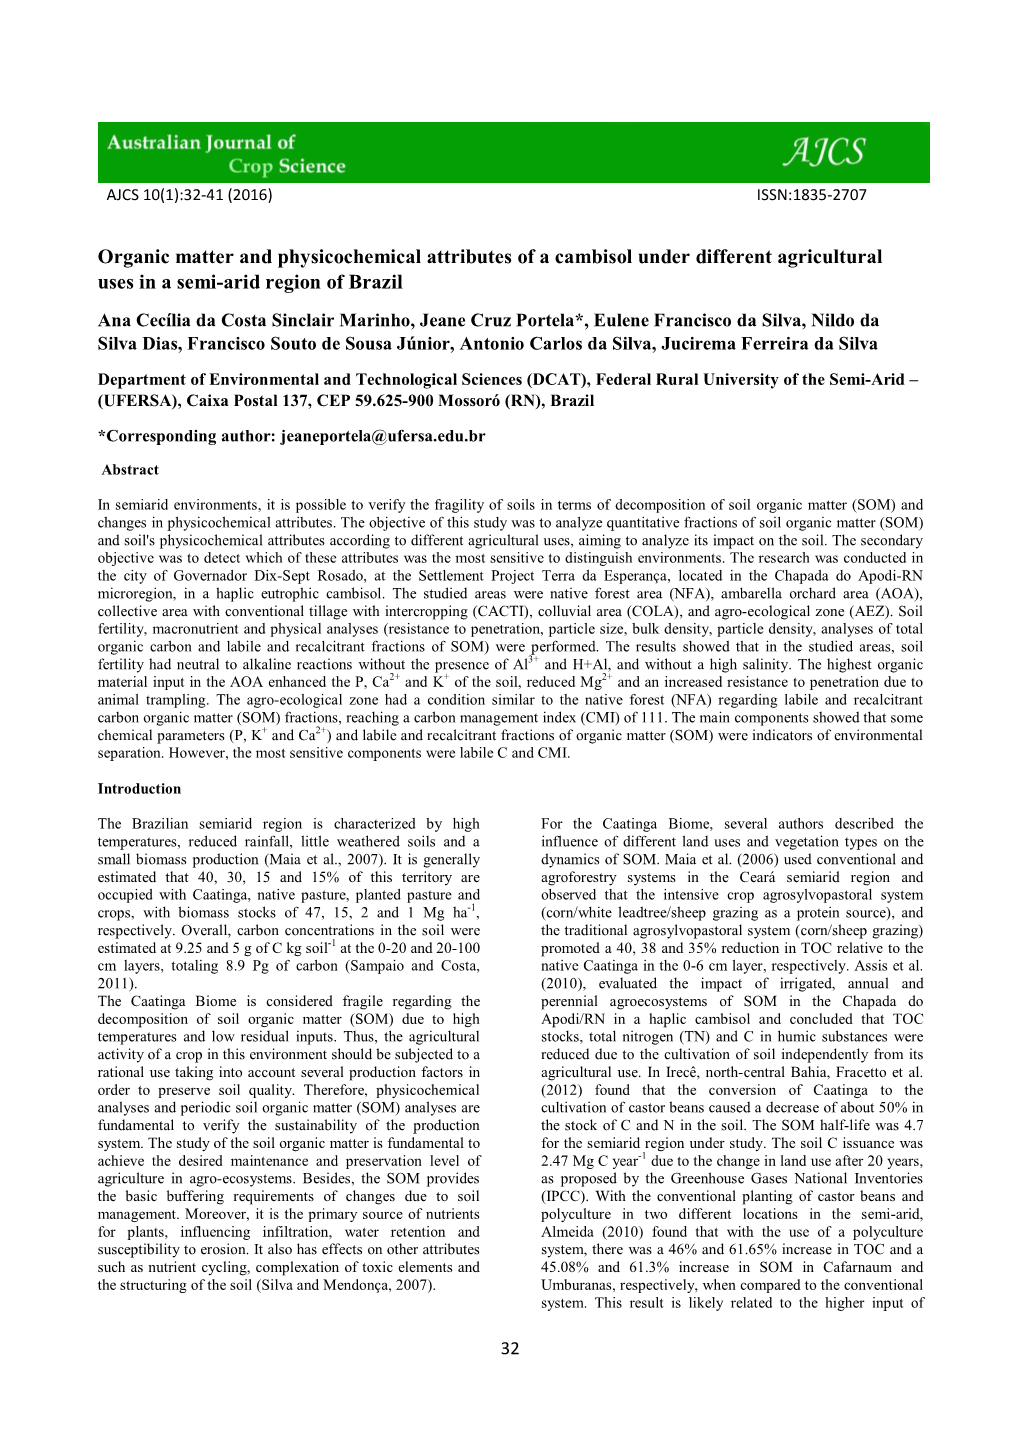 Organic Matter and Physicochemical Attributes of a Cambisol Under